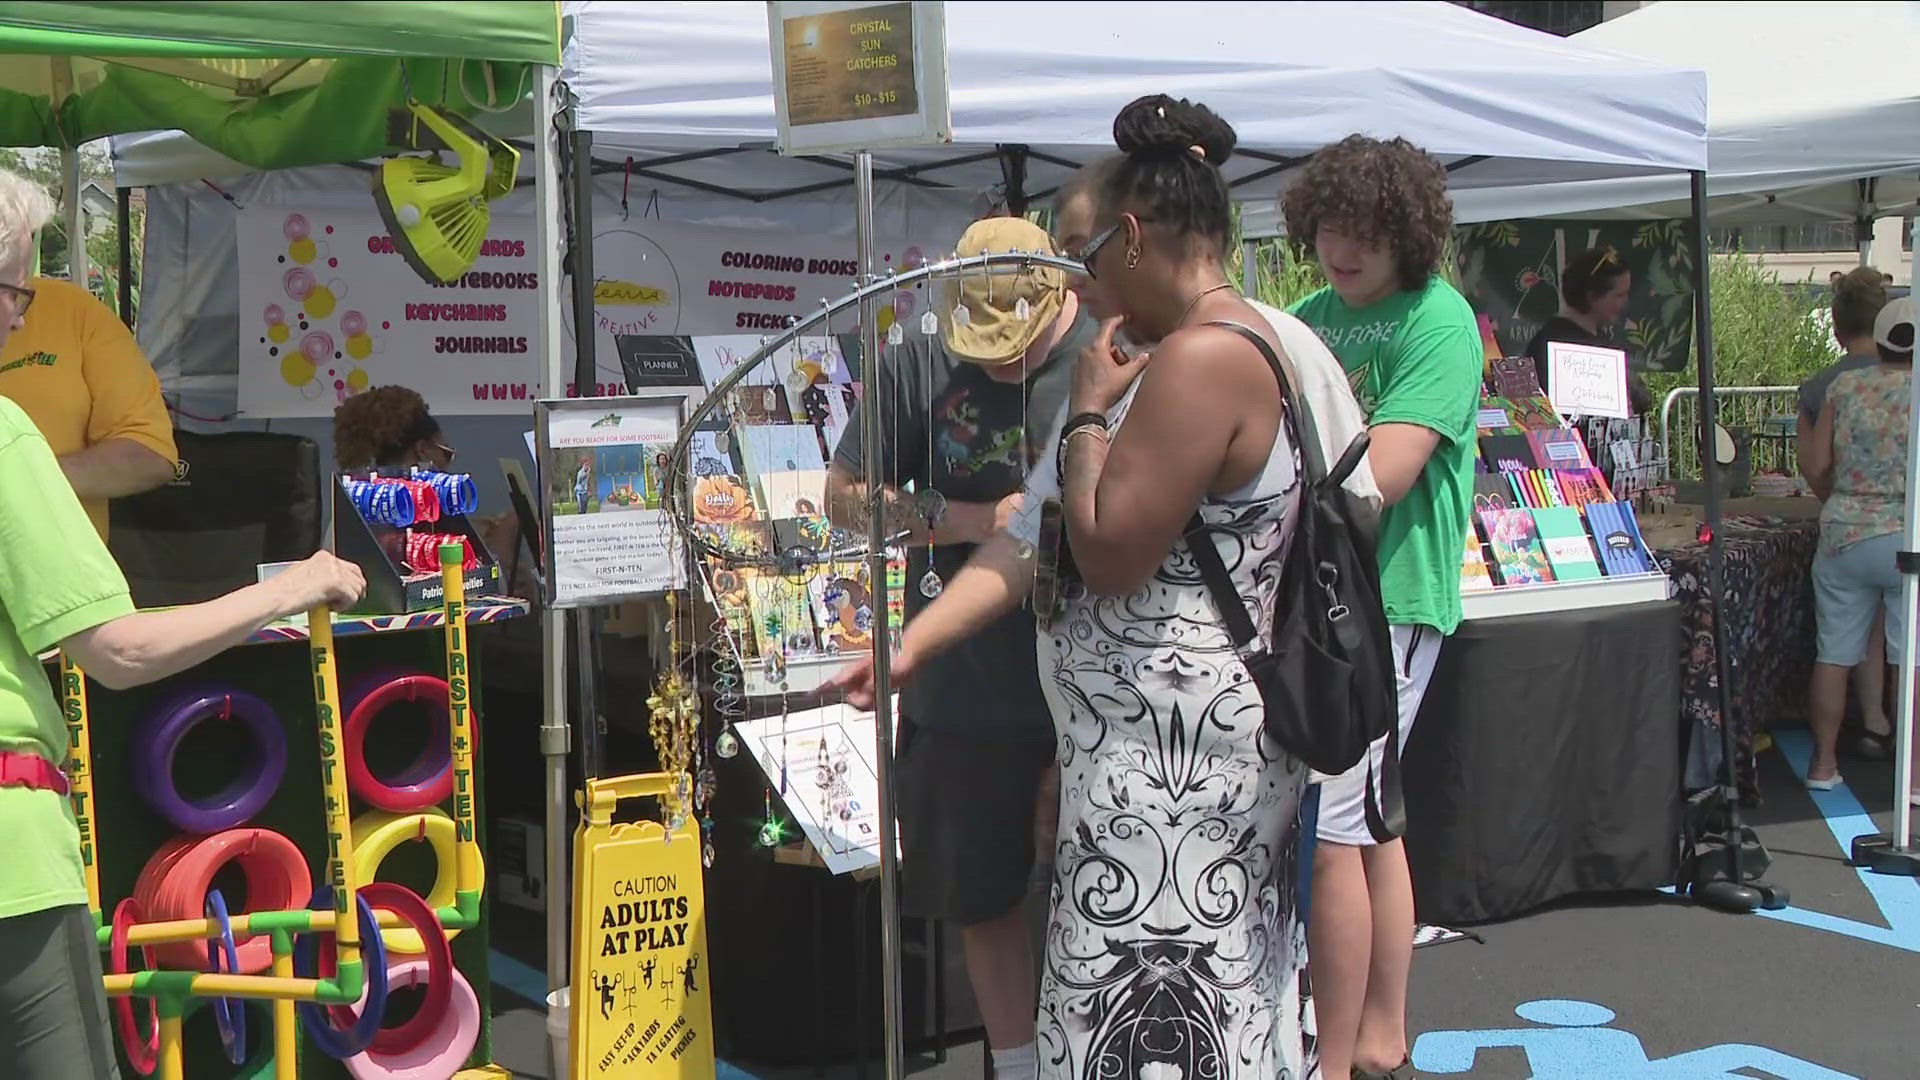 More than 150 vendors offered everything from home goods and jewelry, to new and vintage clothing.